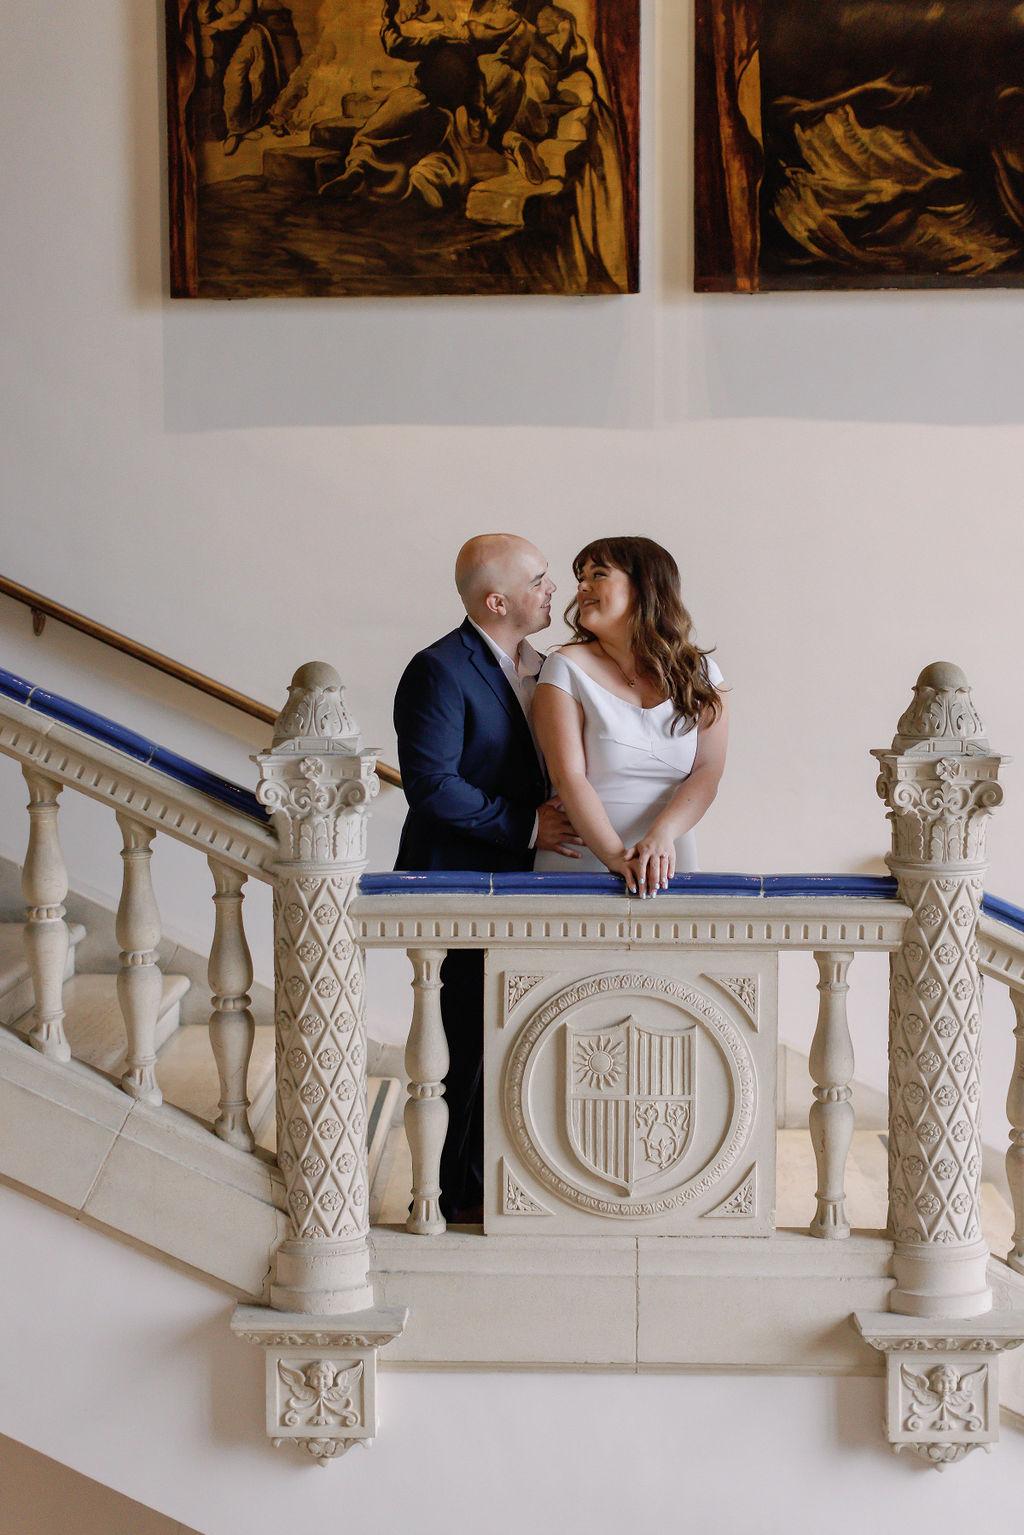 Engagement photo of Jimmy and Hannah overlooking the bannister of the stairs at San Diego Museum of art. |Photo by California Photographer Sarah Block Photography